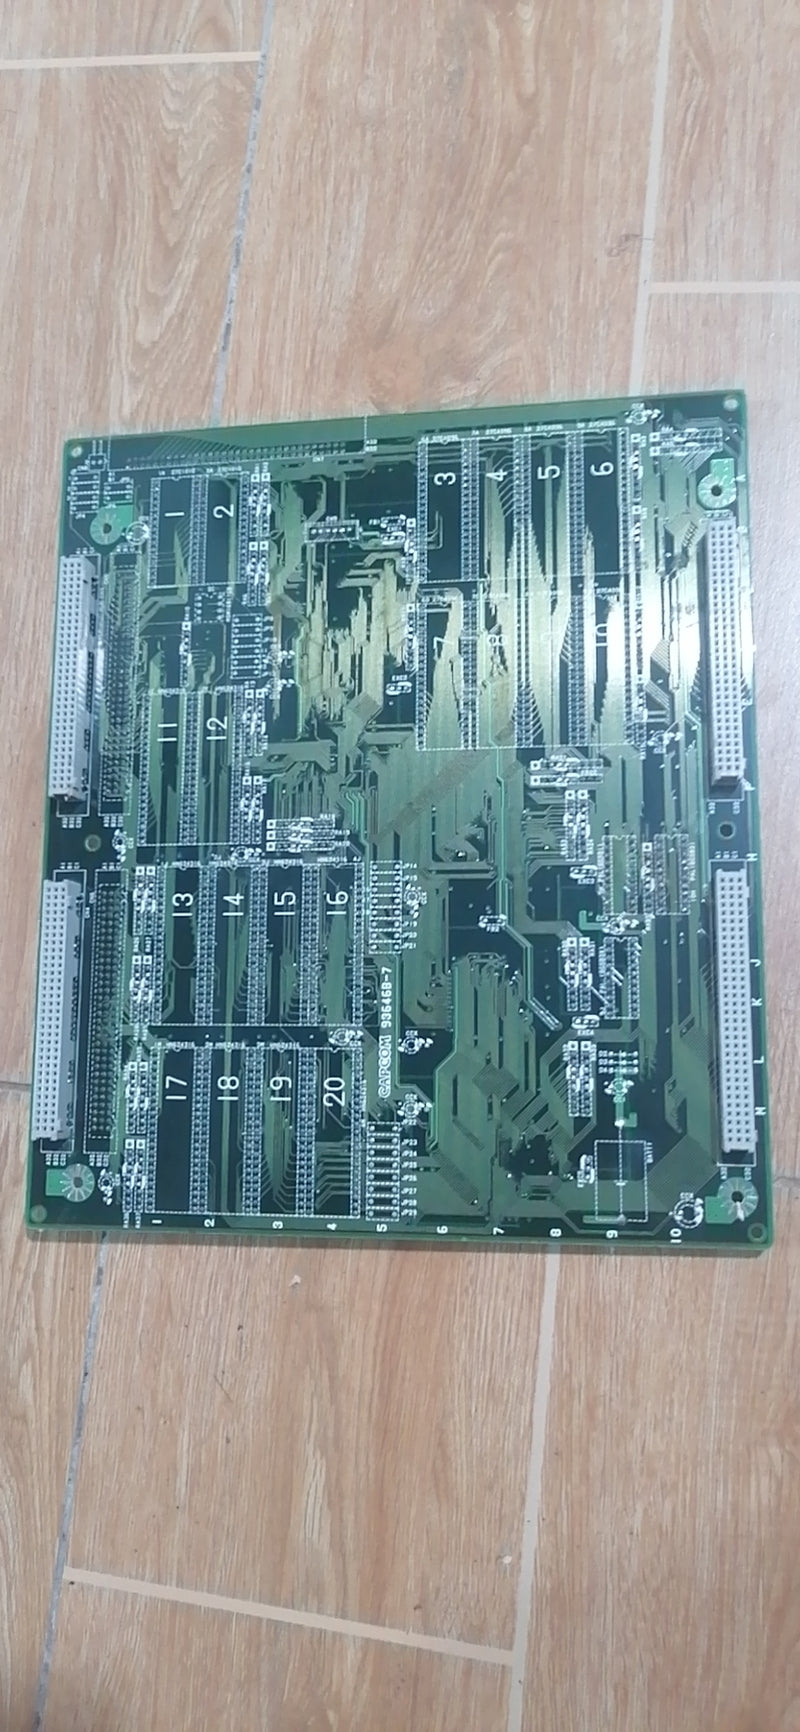 capcom cps2 B board. broken and parts only